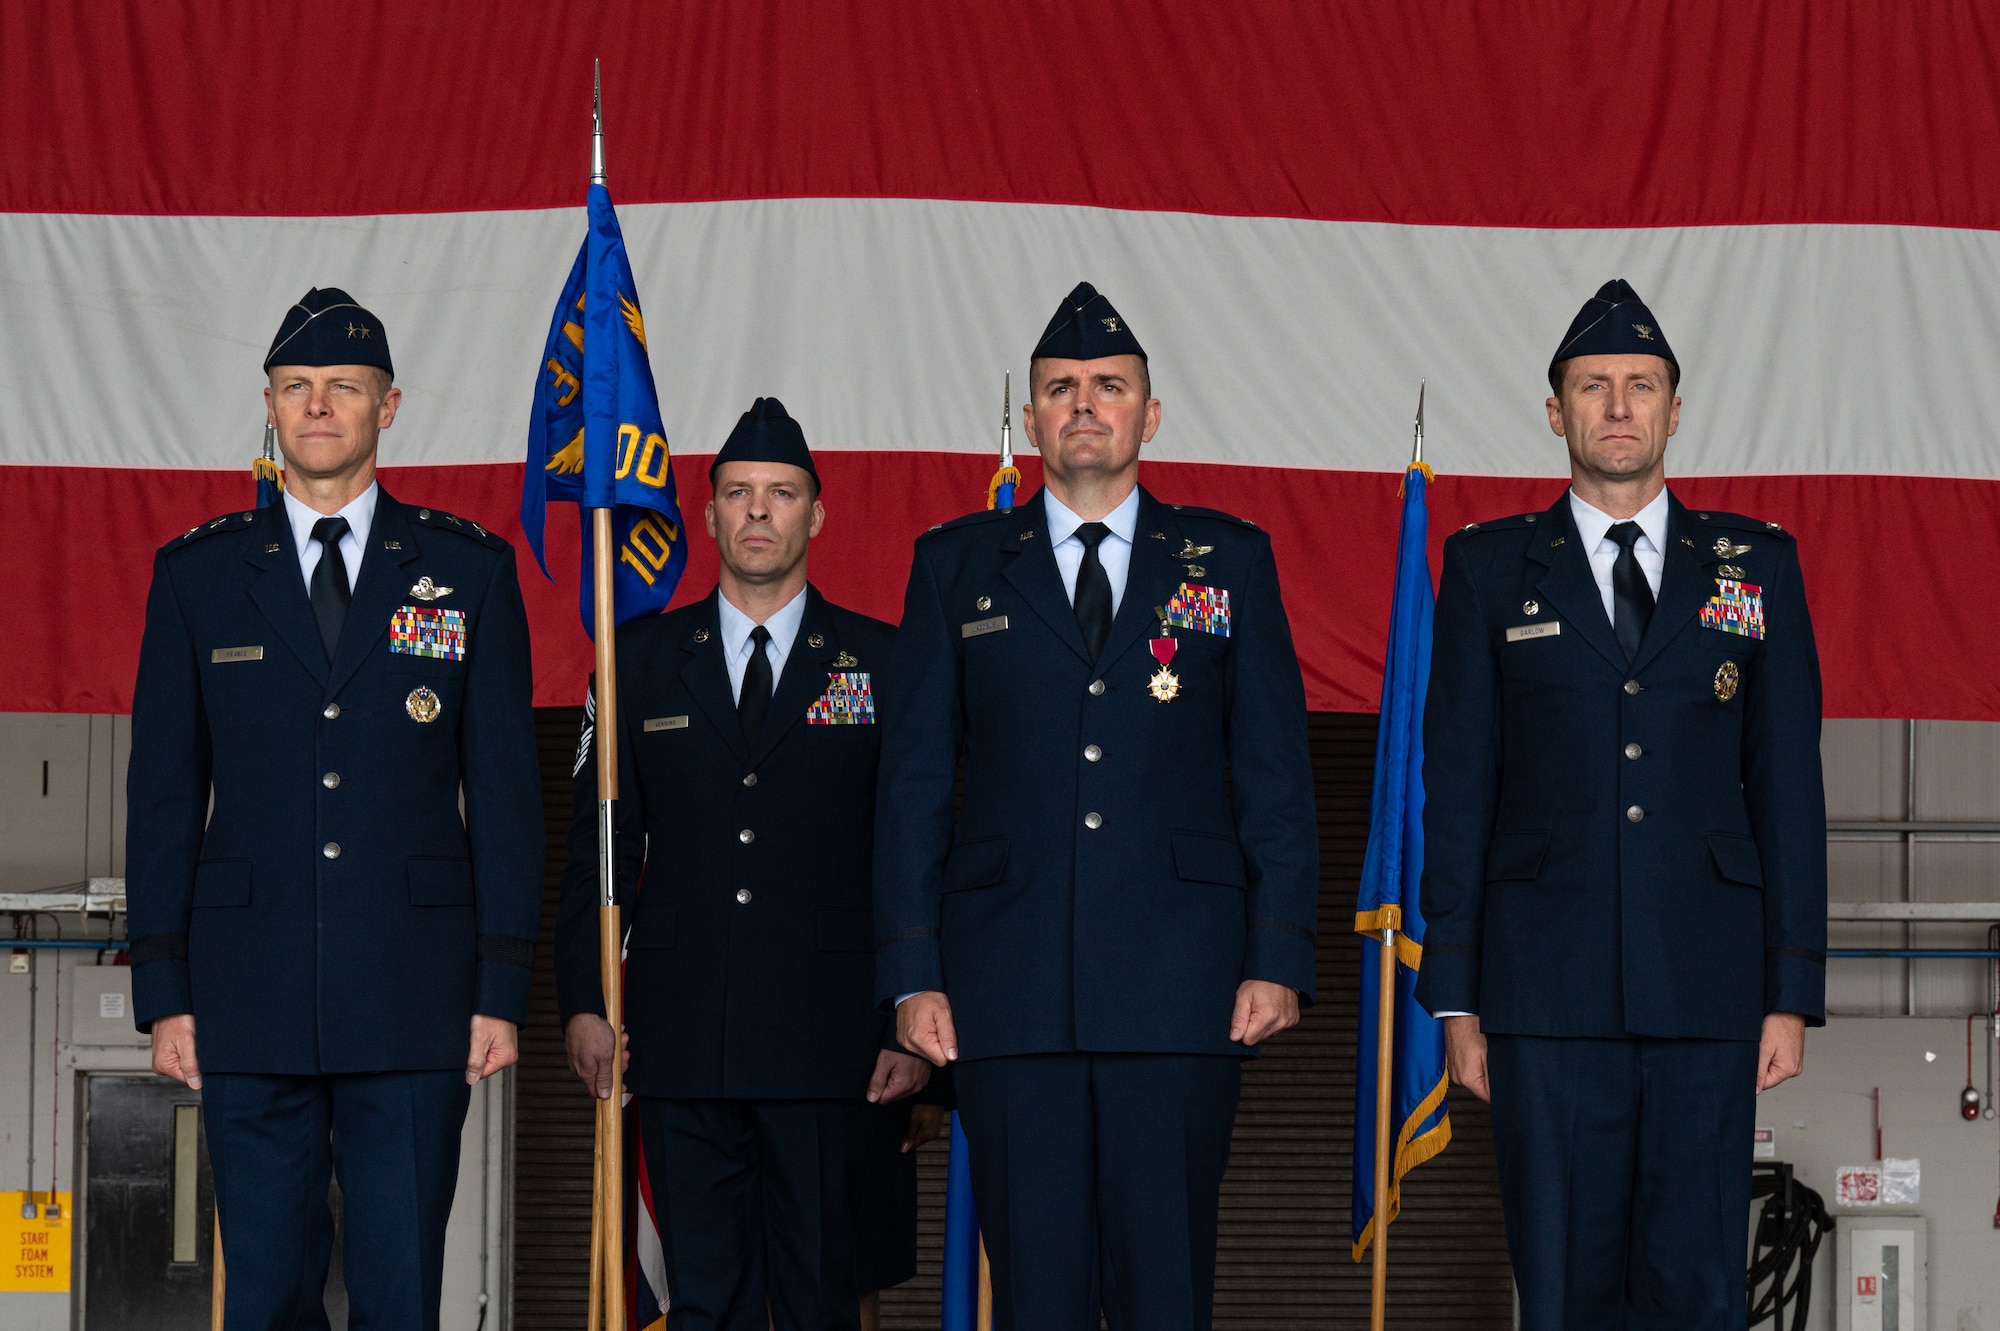 U.S. Air Force Col. Ryan Garlow takes command of the 100th Air Refueling Wing at a change of command ceremony at RAF Mildenhall, England, July 17, 2023.